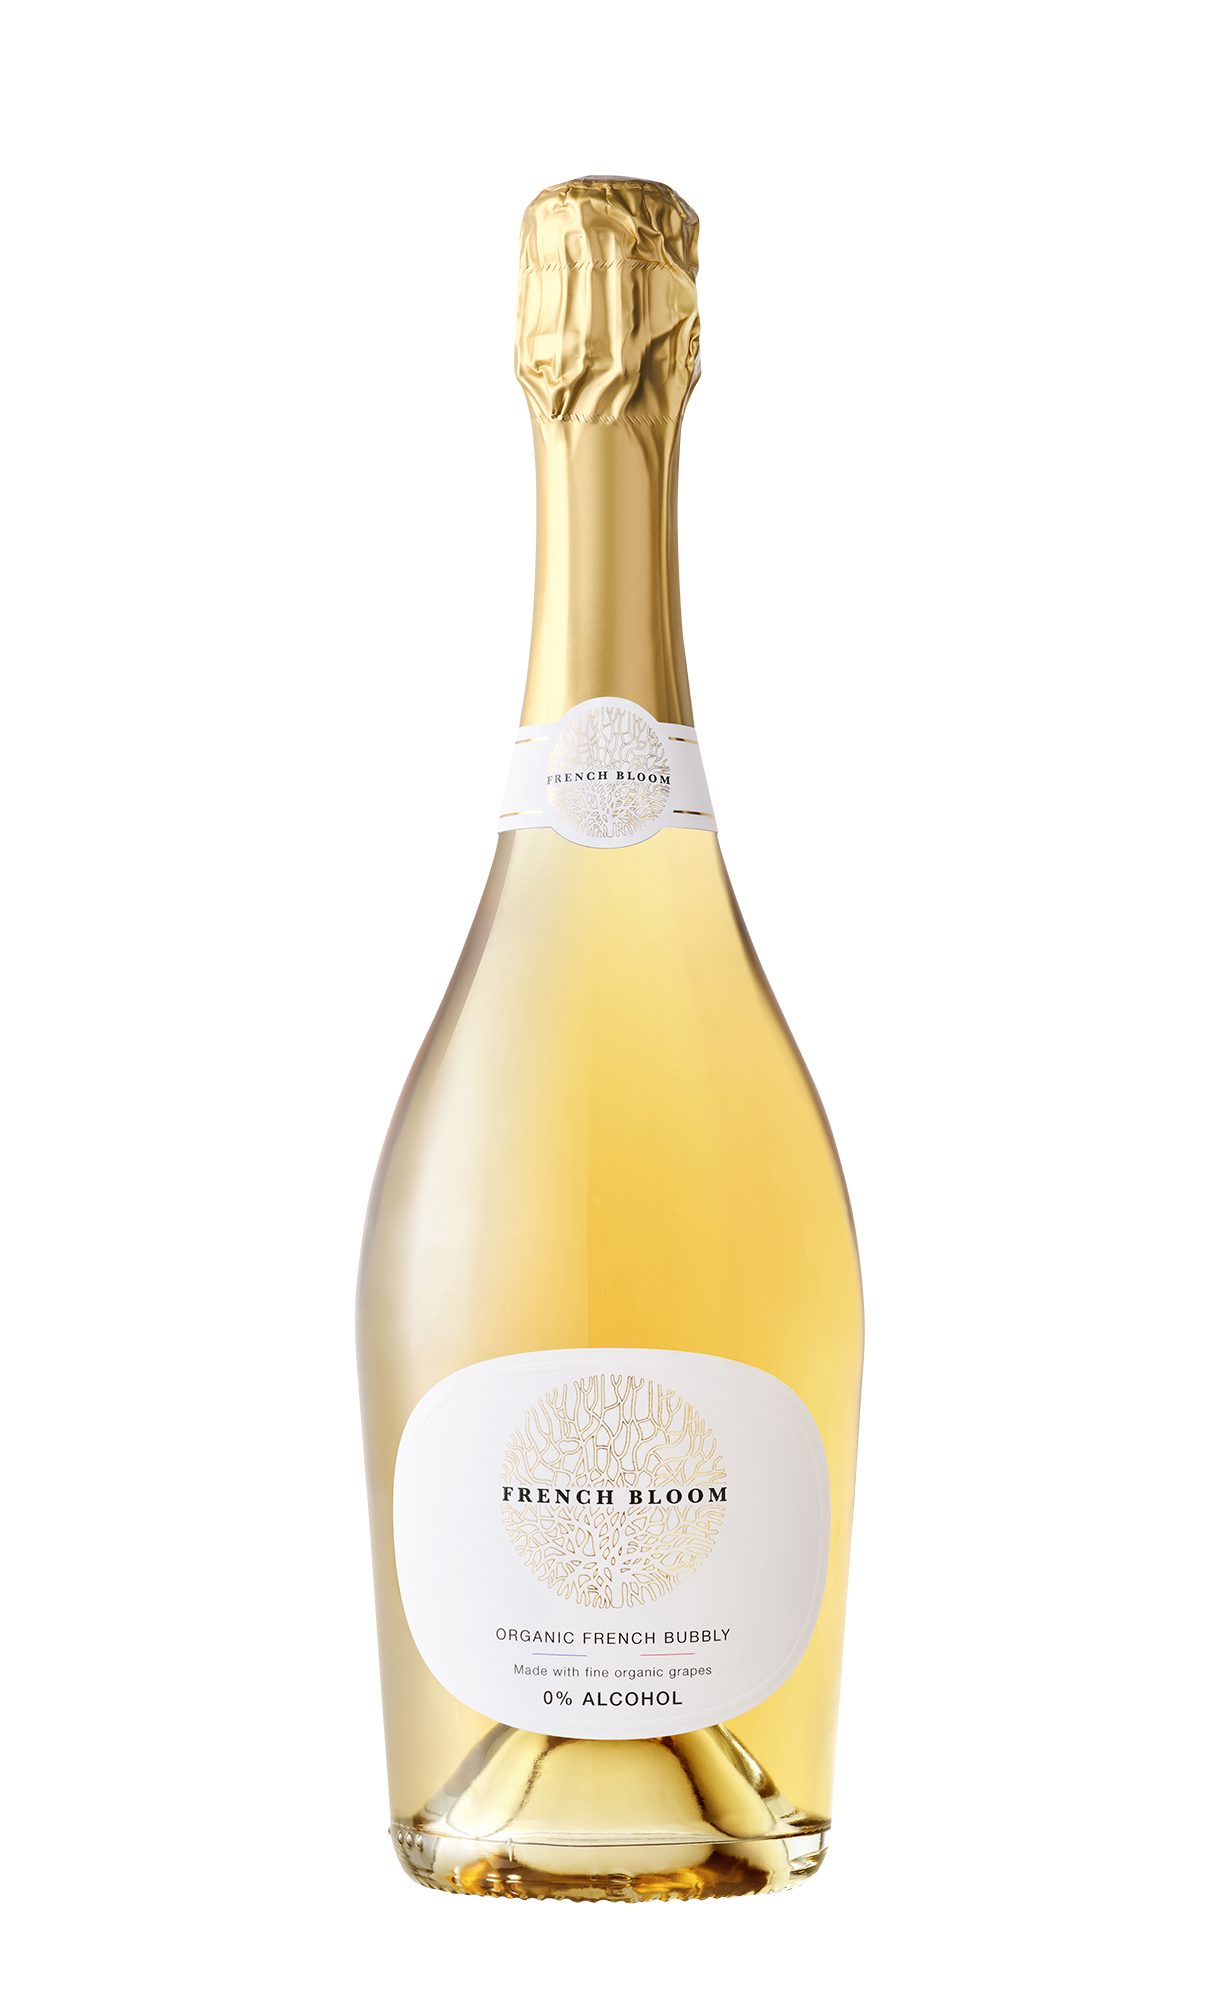 Alcohol-free sparkling wine by French Bloom